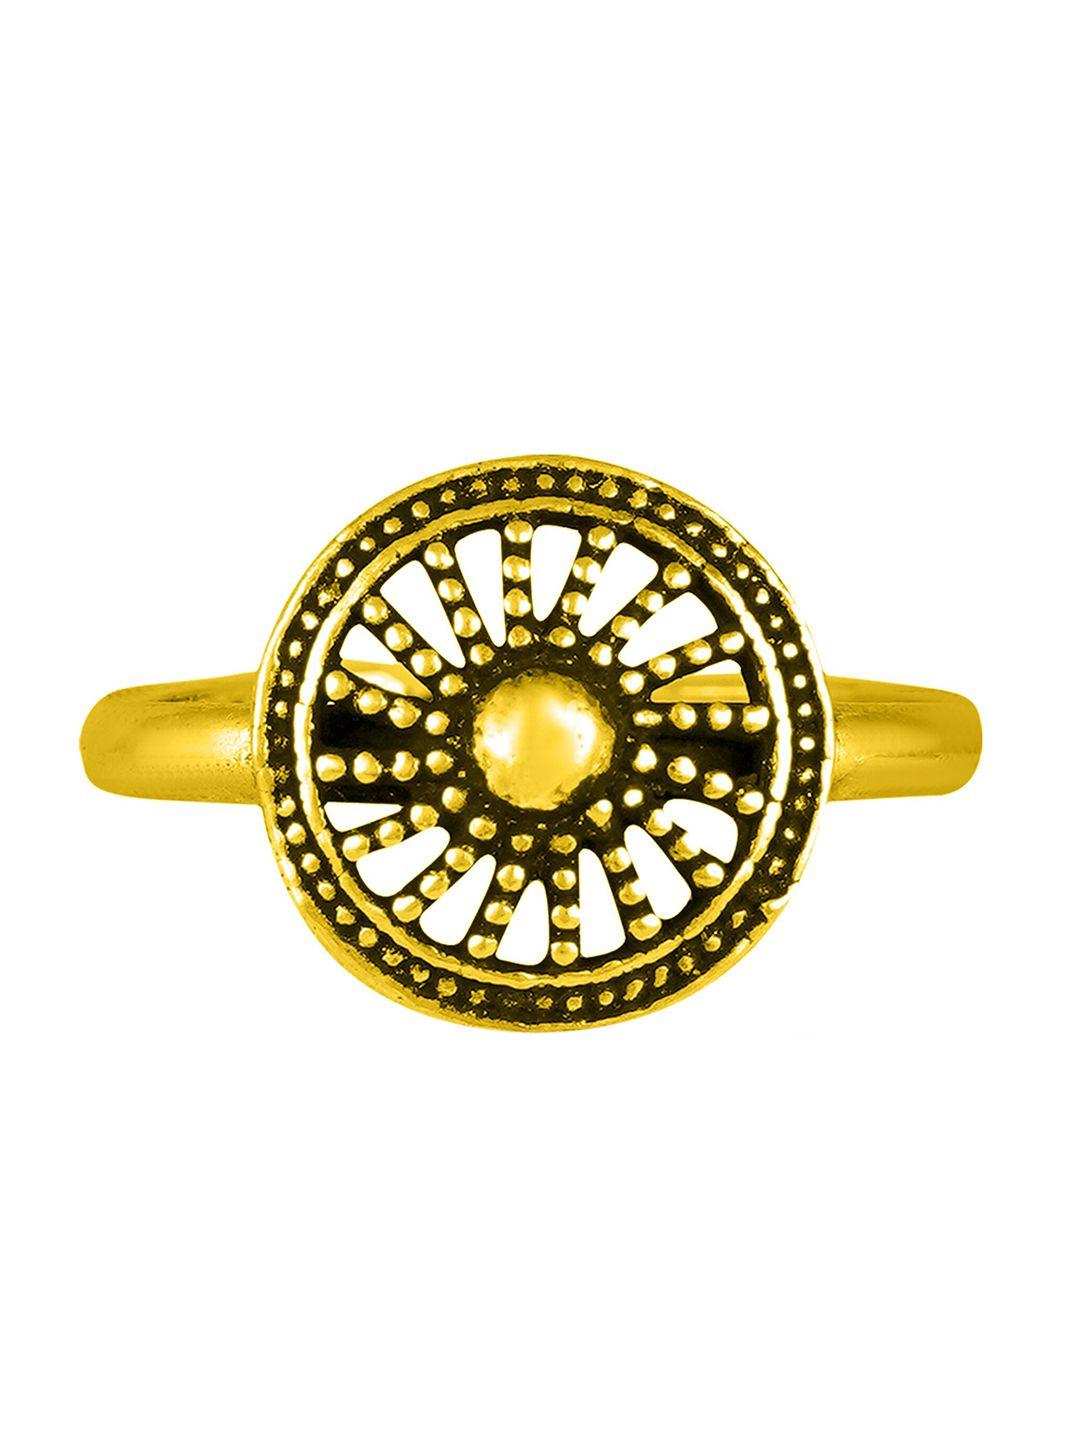 ahilya 92.5 sterling silver & gold-plated toe ring